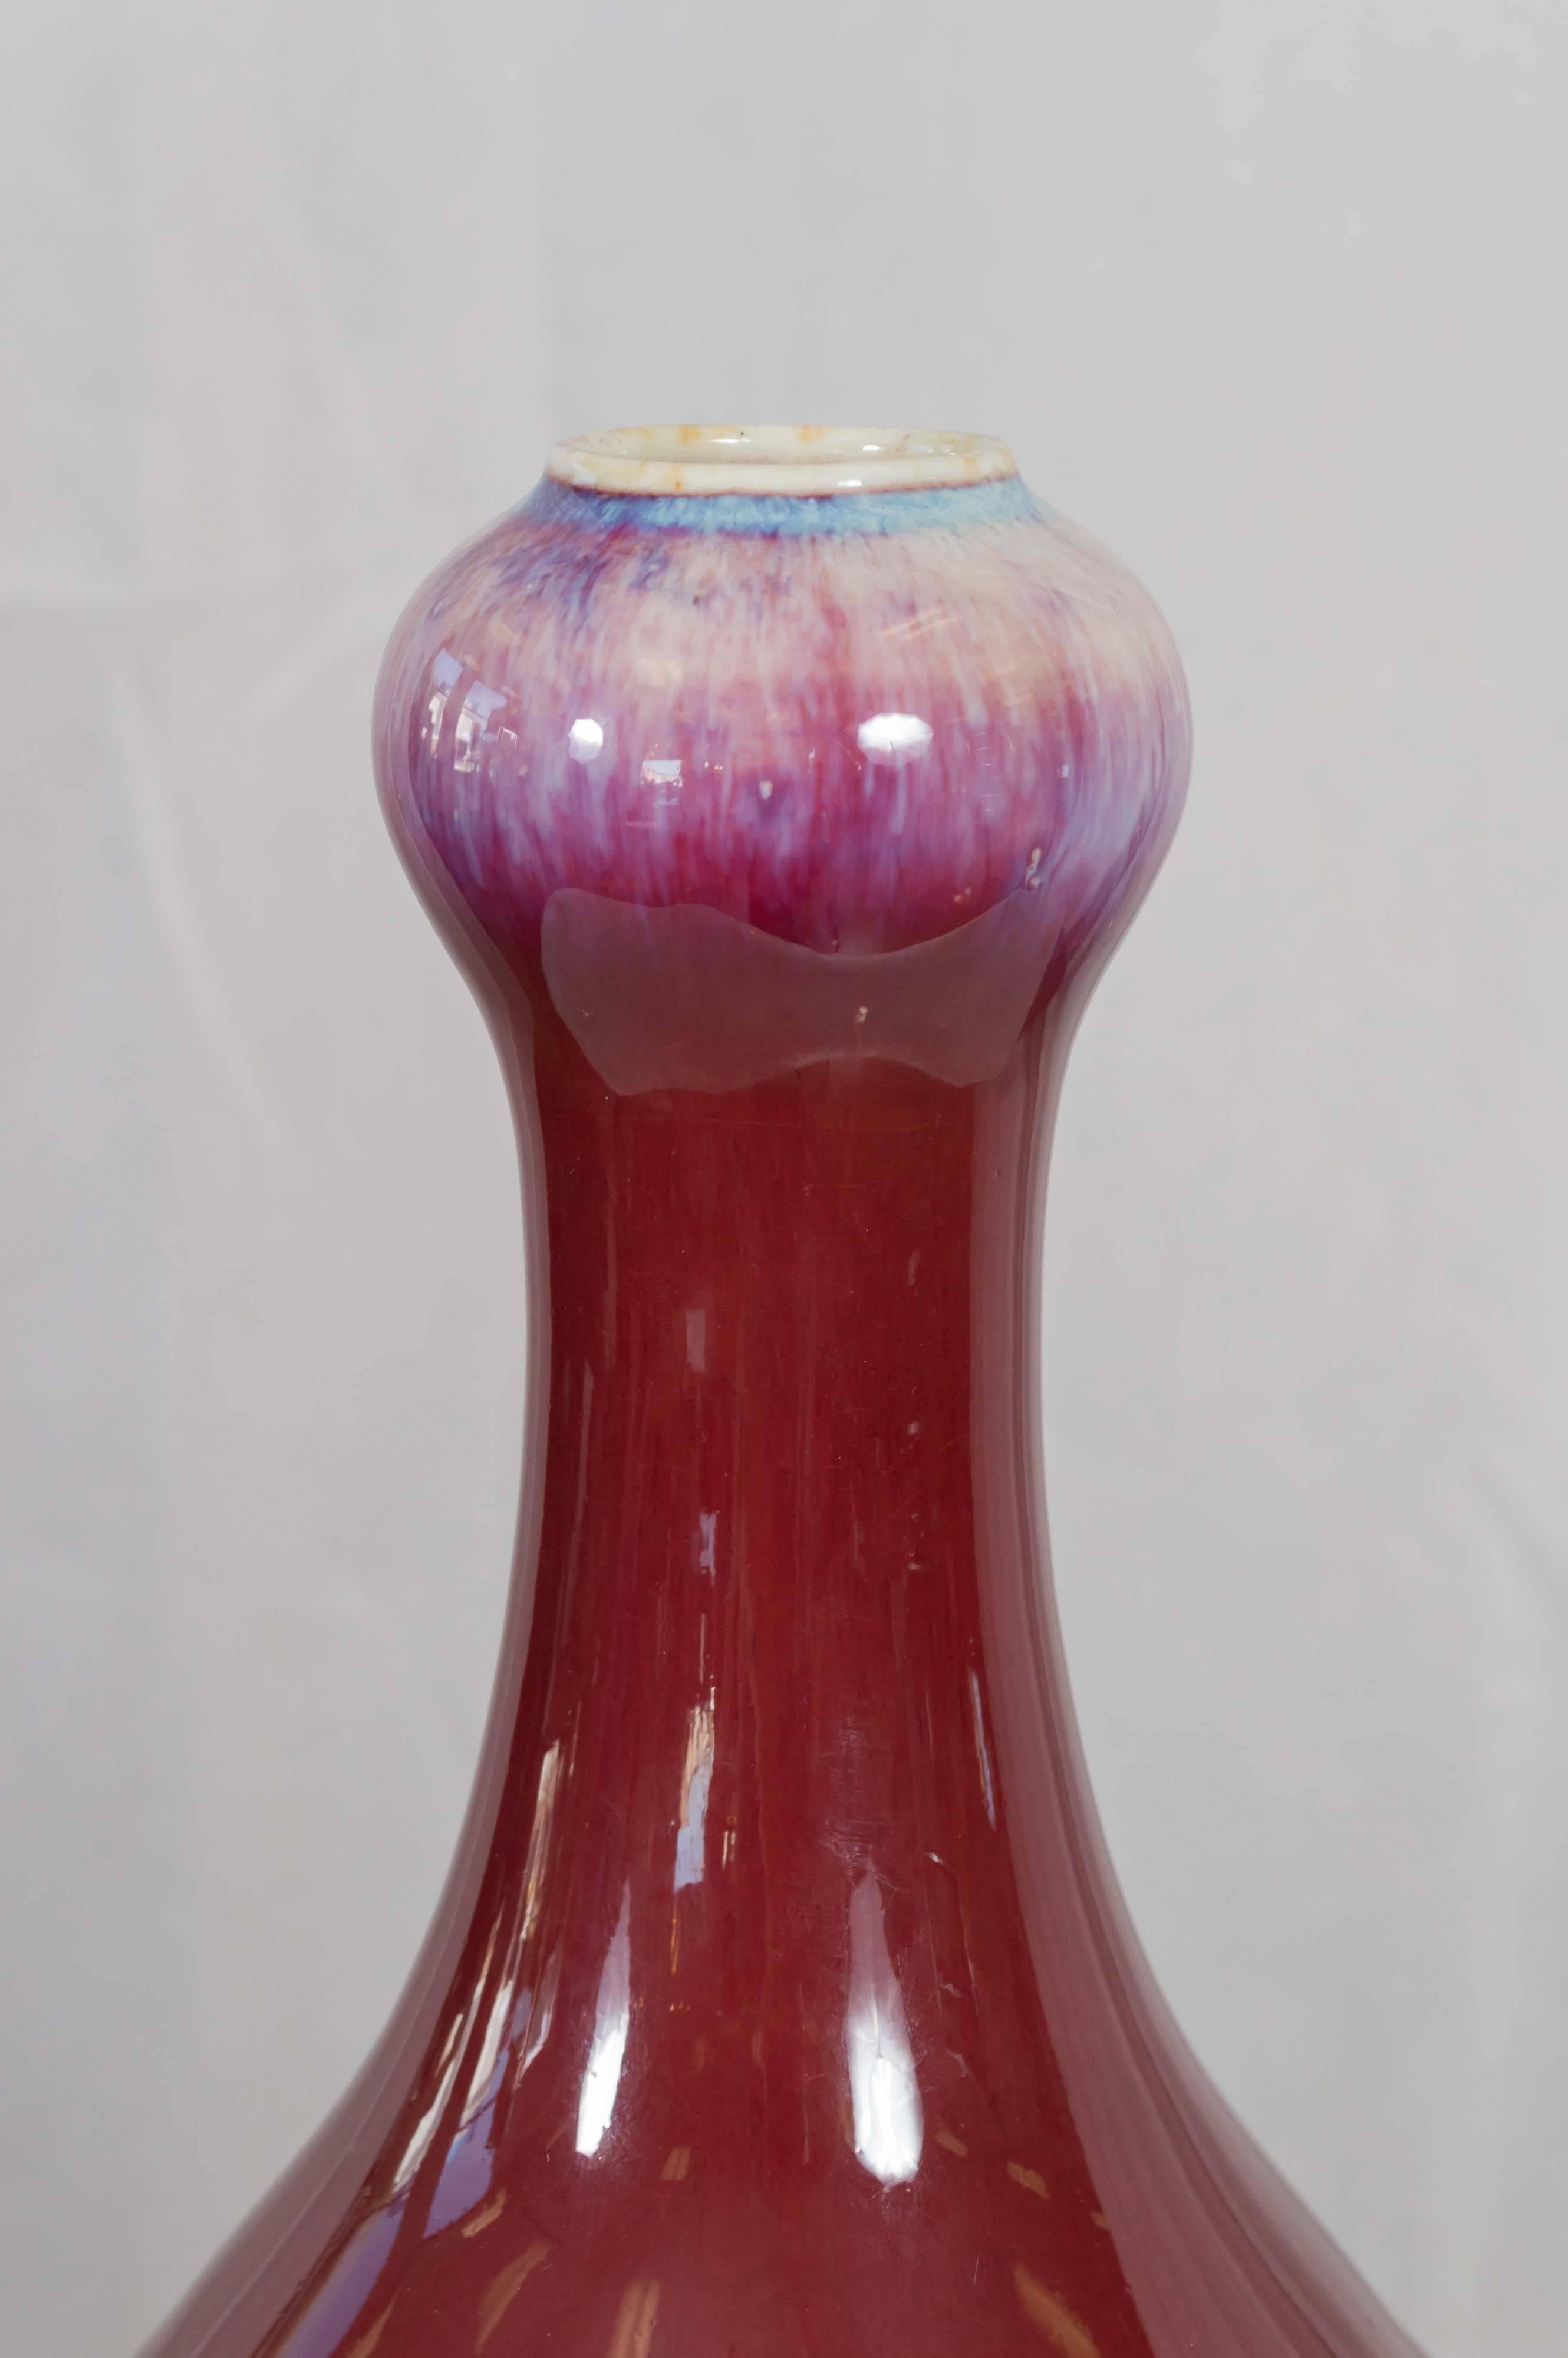 Its wonderfully proportioned pear-shaped form is significant in scale, with an imposing yet elegant Silhouette. Body and neck are finished in a deep, rich and lustrous sang de boeuf glaze. The beautiful hues of its bulbous, white-lipped mouth